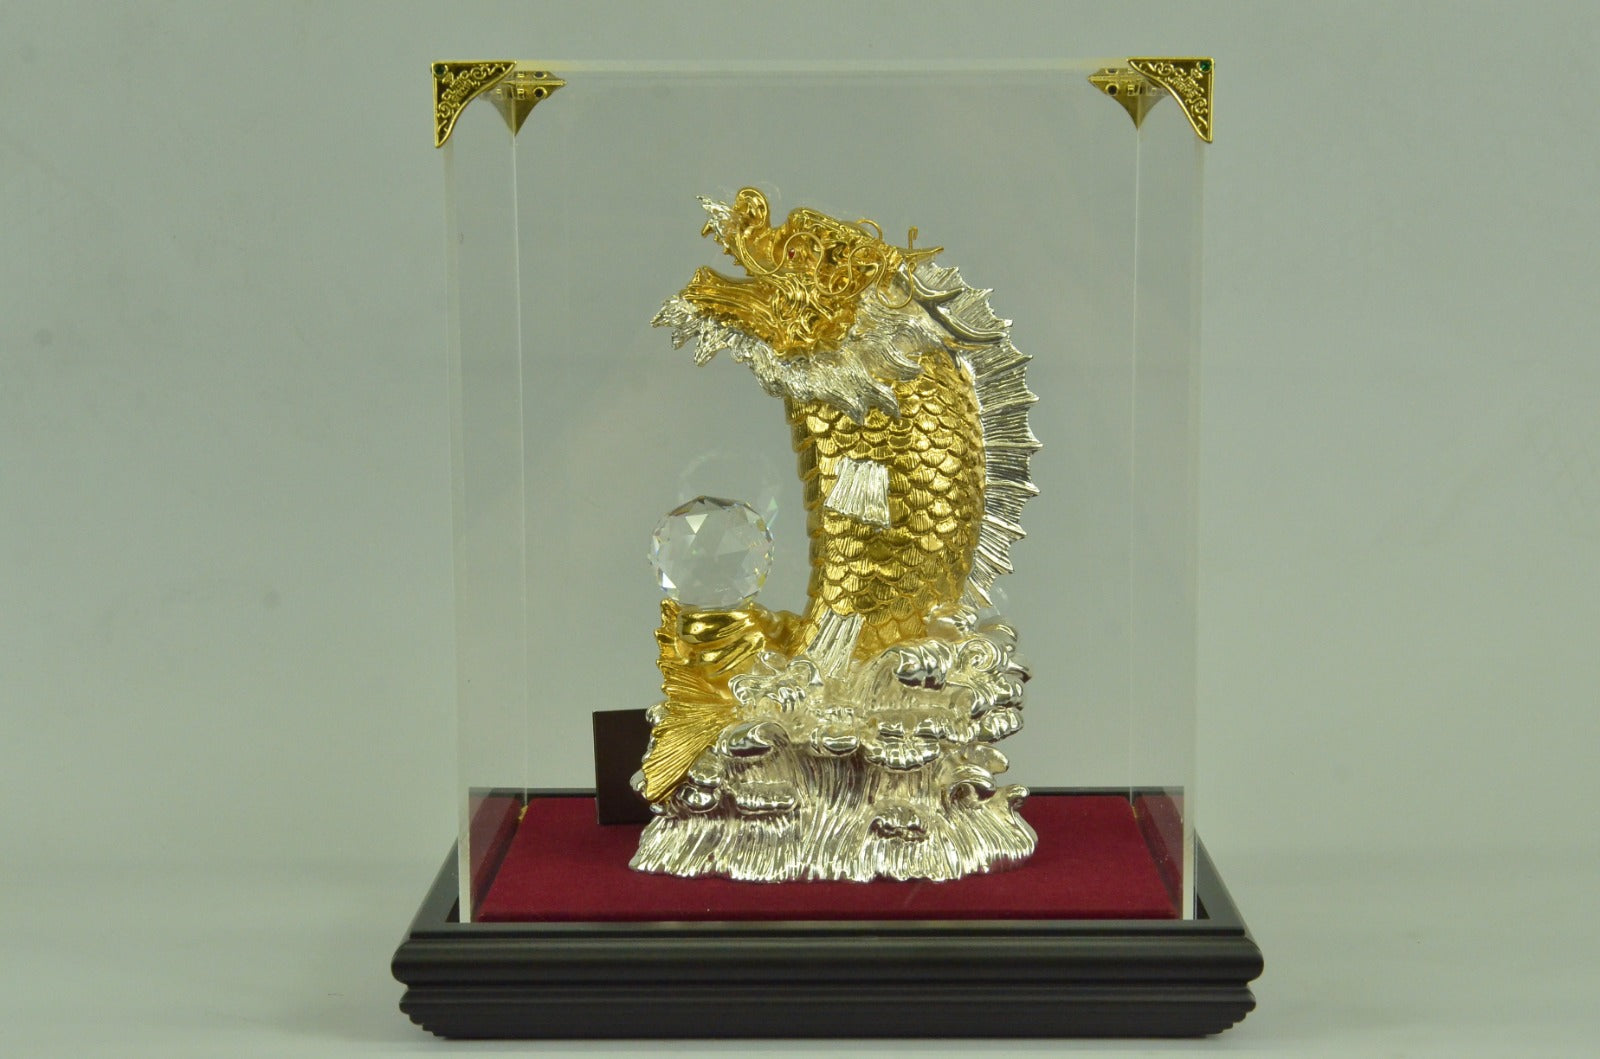 24K Gold and Silver Plated Collectible Cobra Dragon Hot Cast Figurine Figure